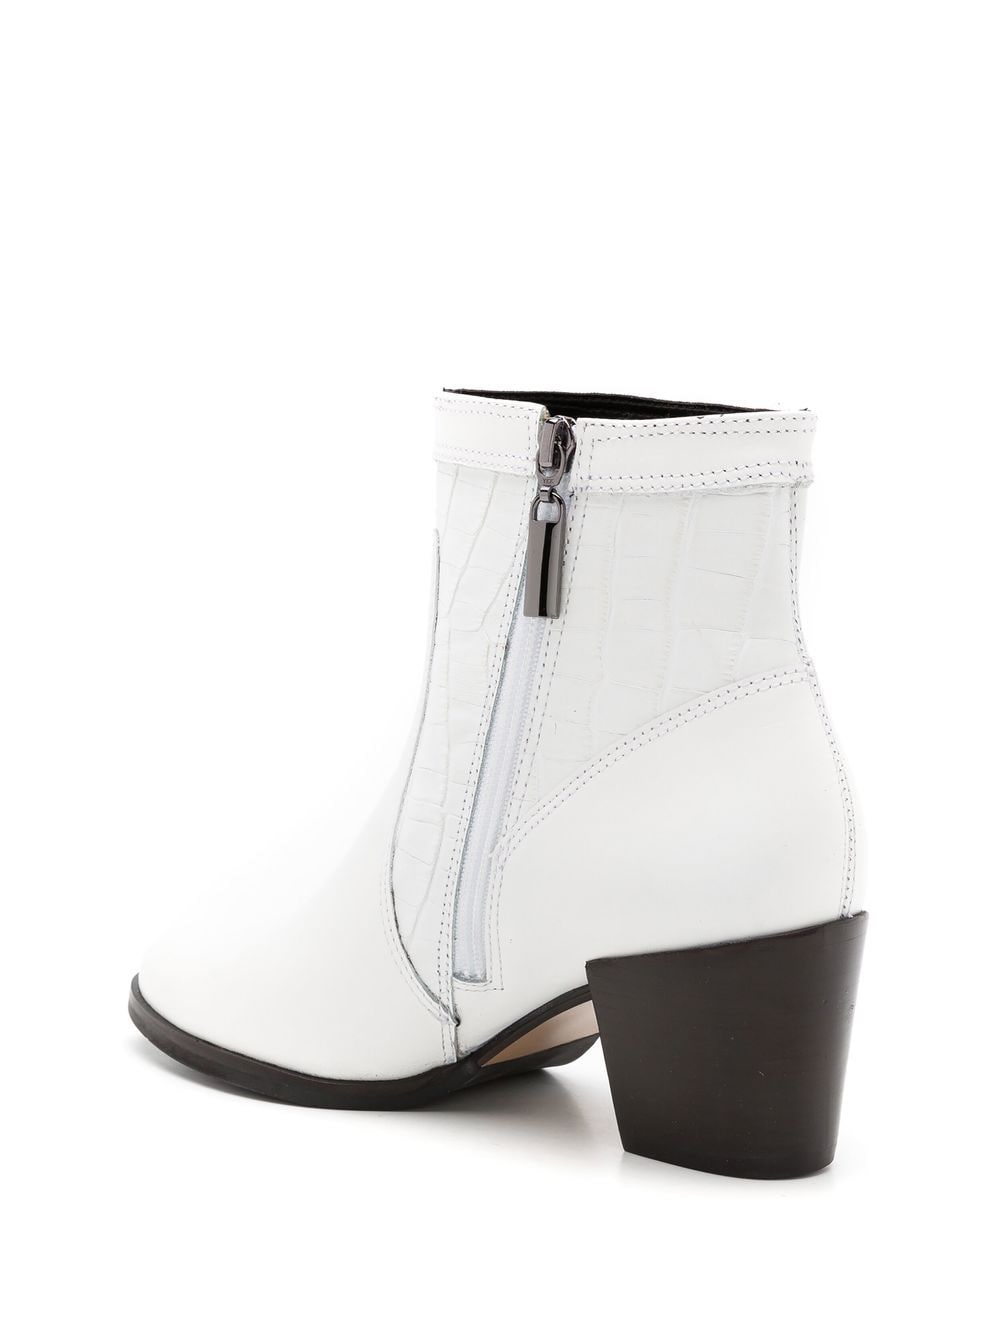 Shop Studio Chofakian Studio 70mm Ankle Boots In White